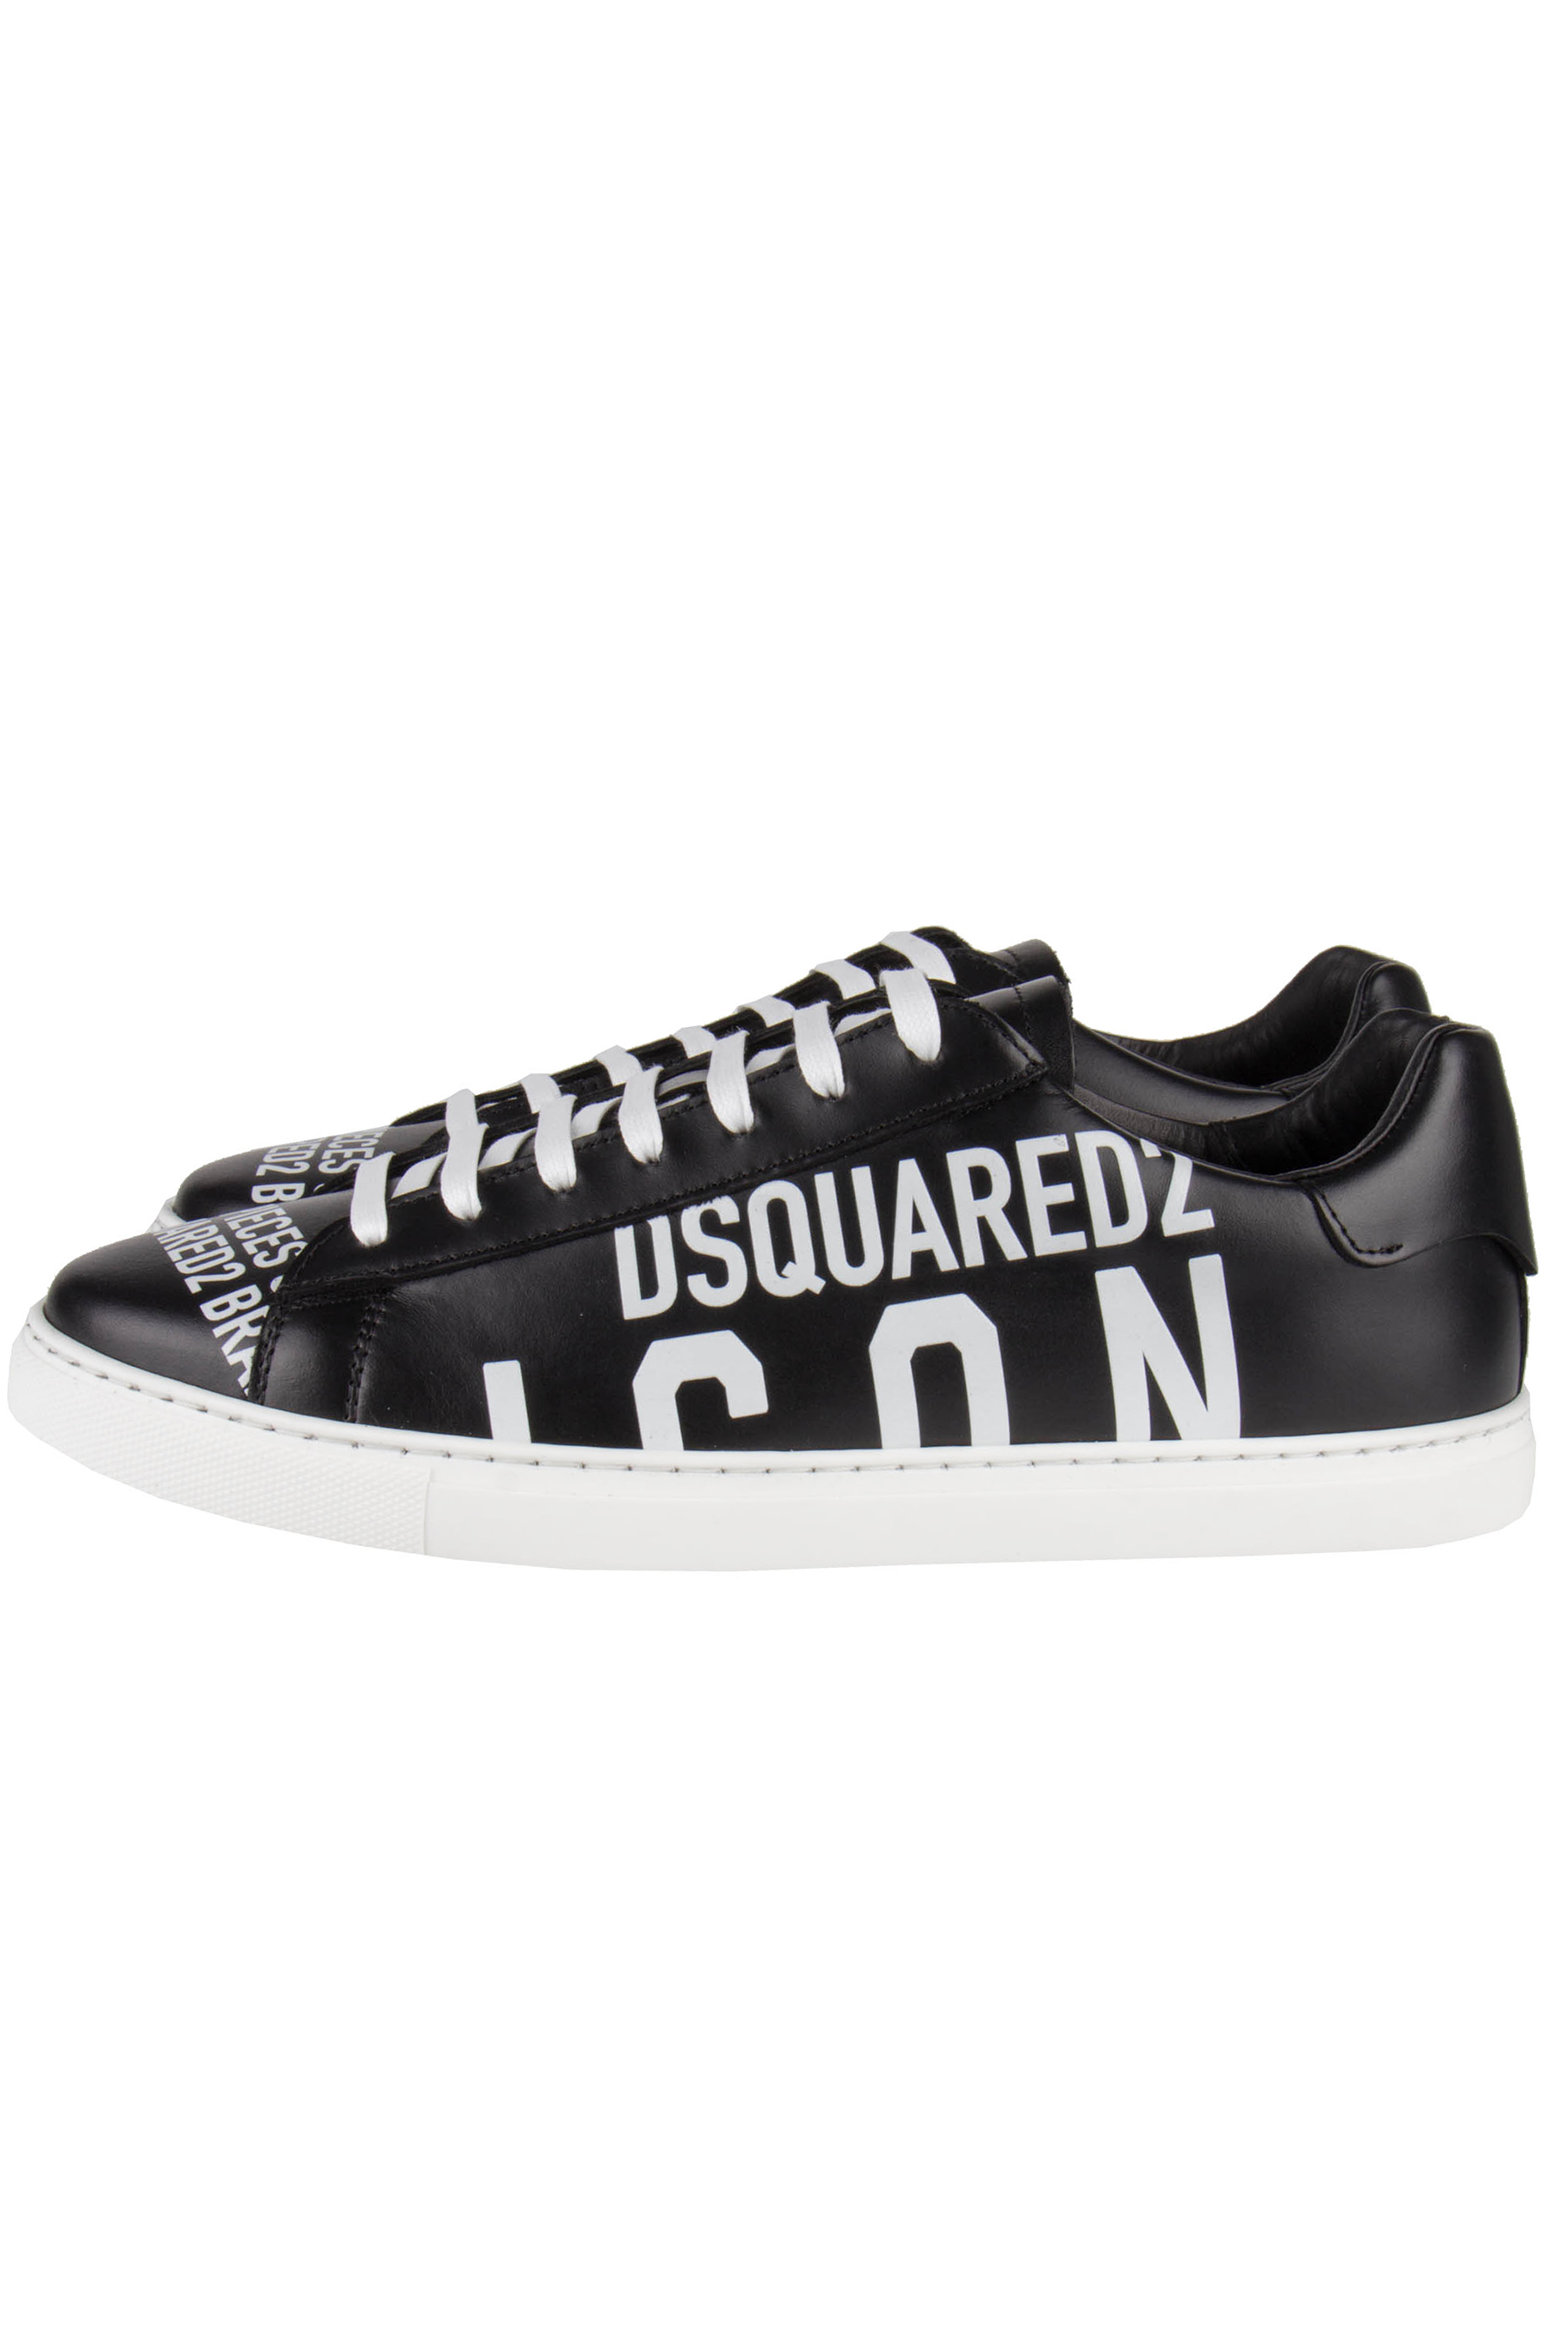 dsquared sneakers new